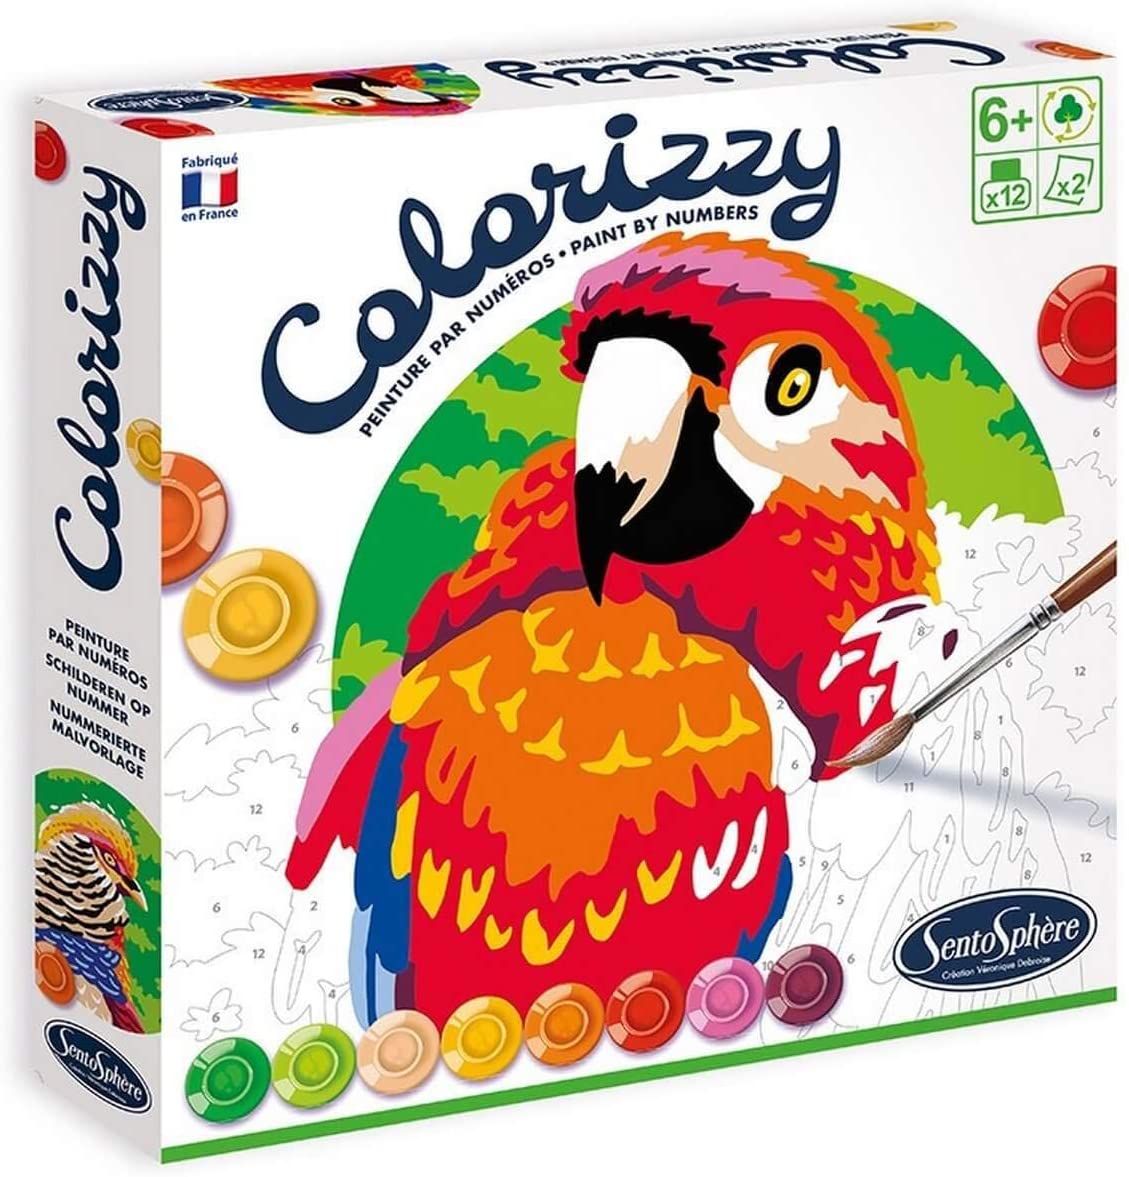 Sentosphere 3904501 Colorizzy, Paint-By-Numbers Drawing Kit For Children, A